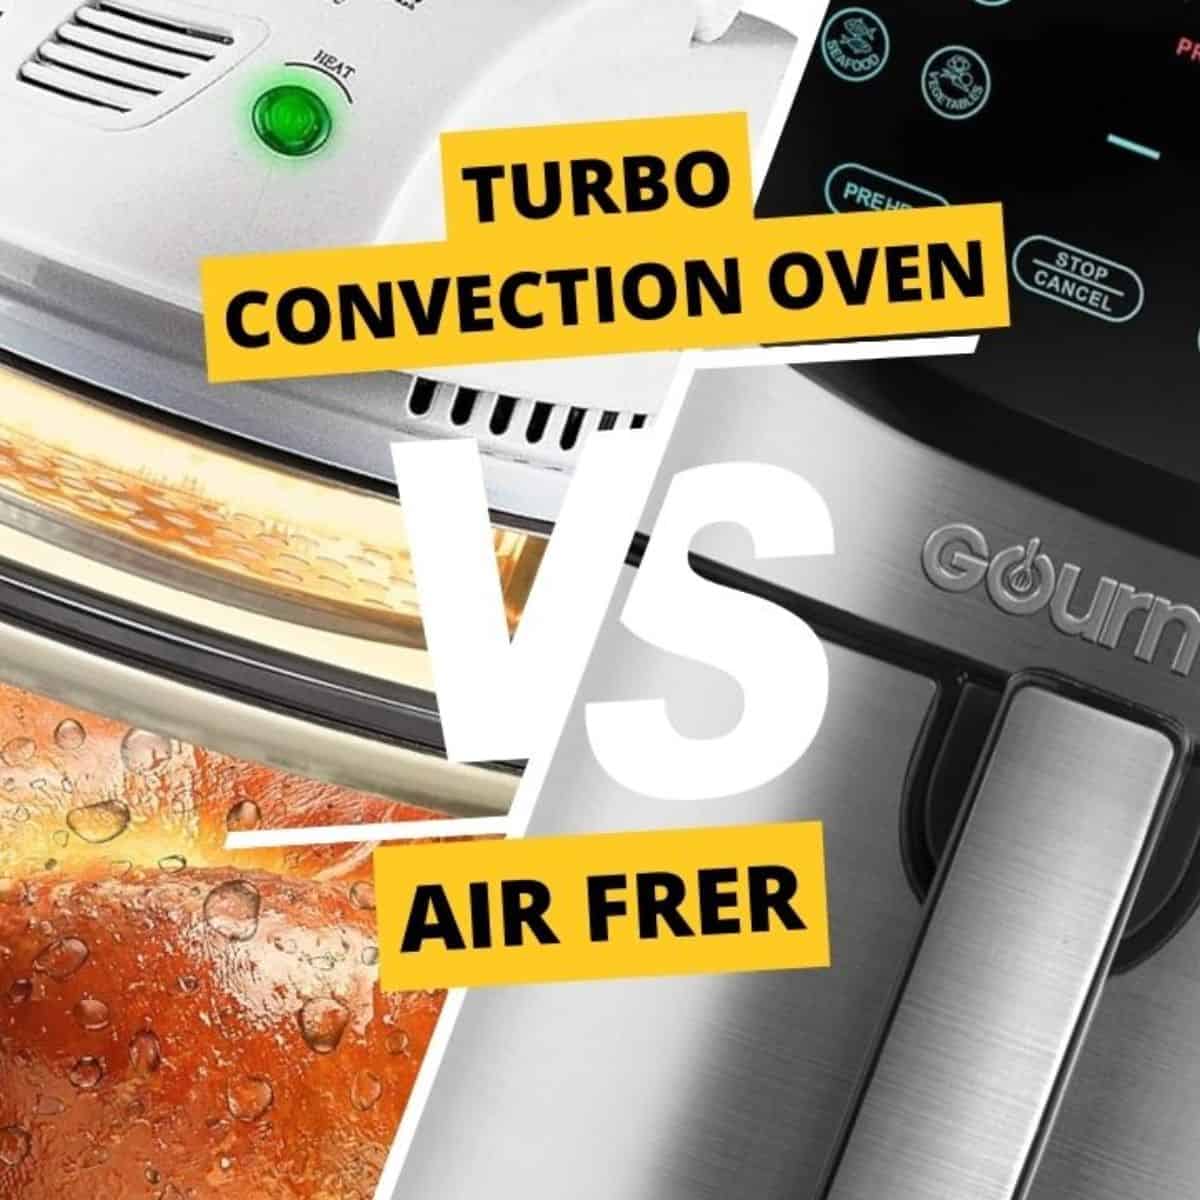 turbo convection oven vs air fryer